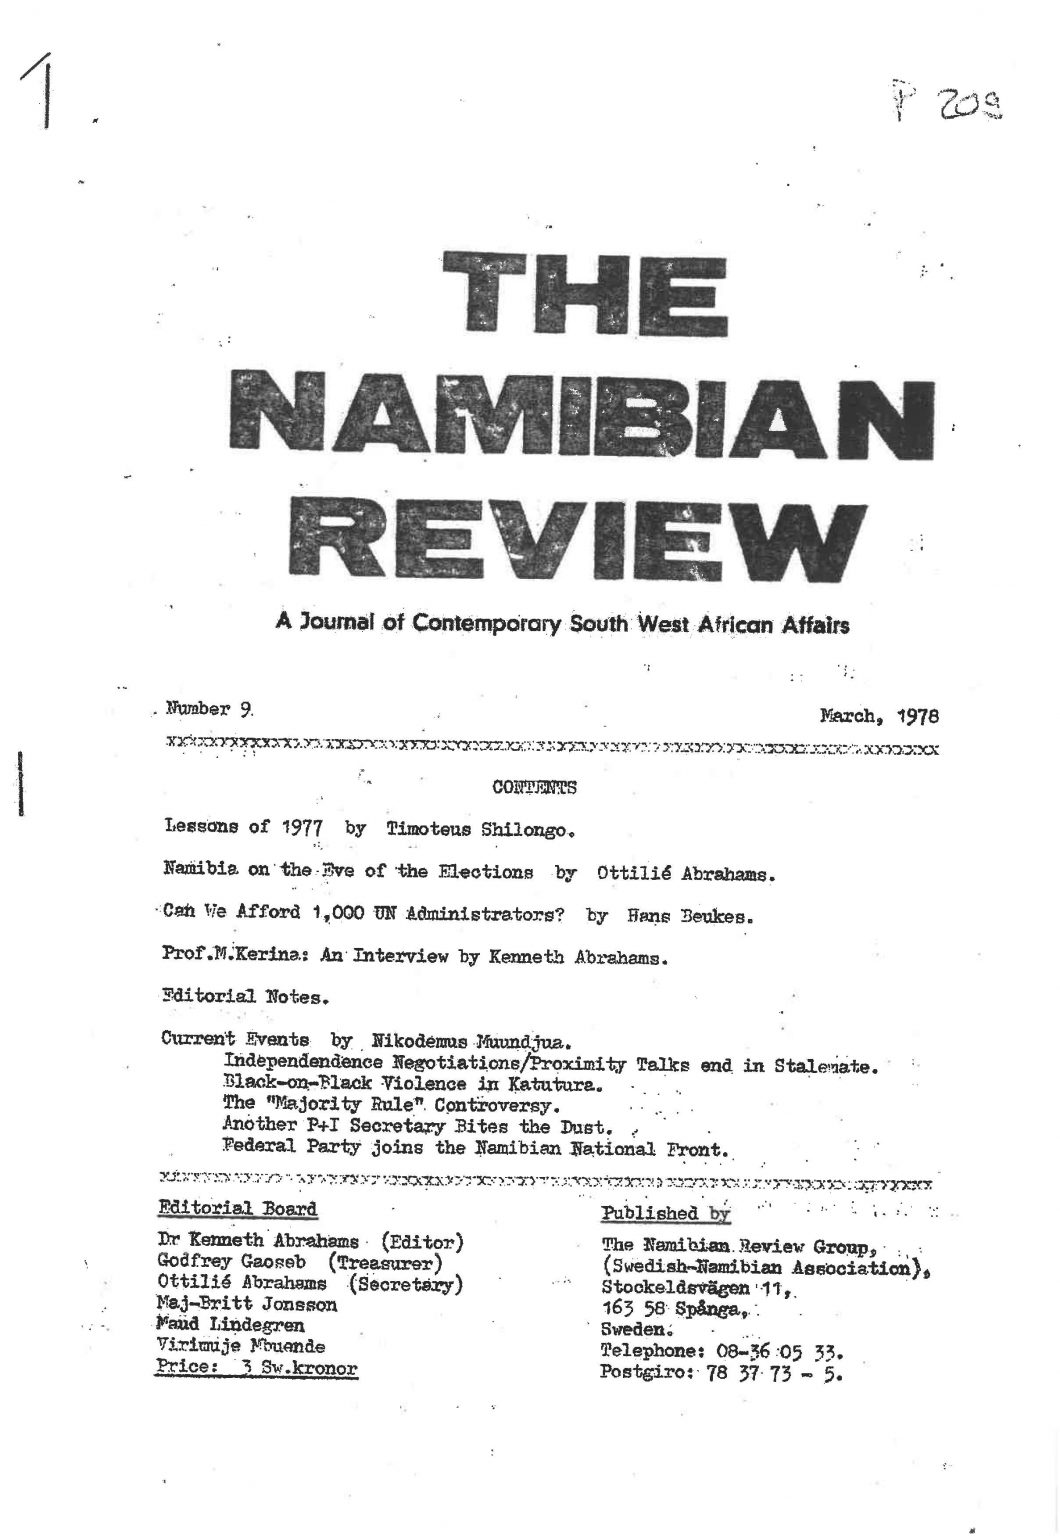 Cover of The Namibian Review. no. 9